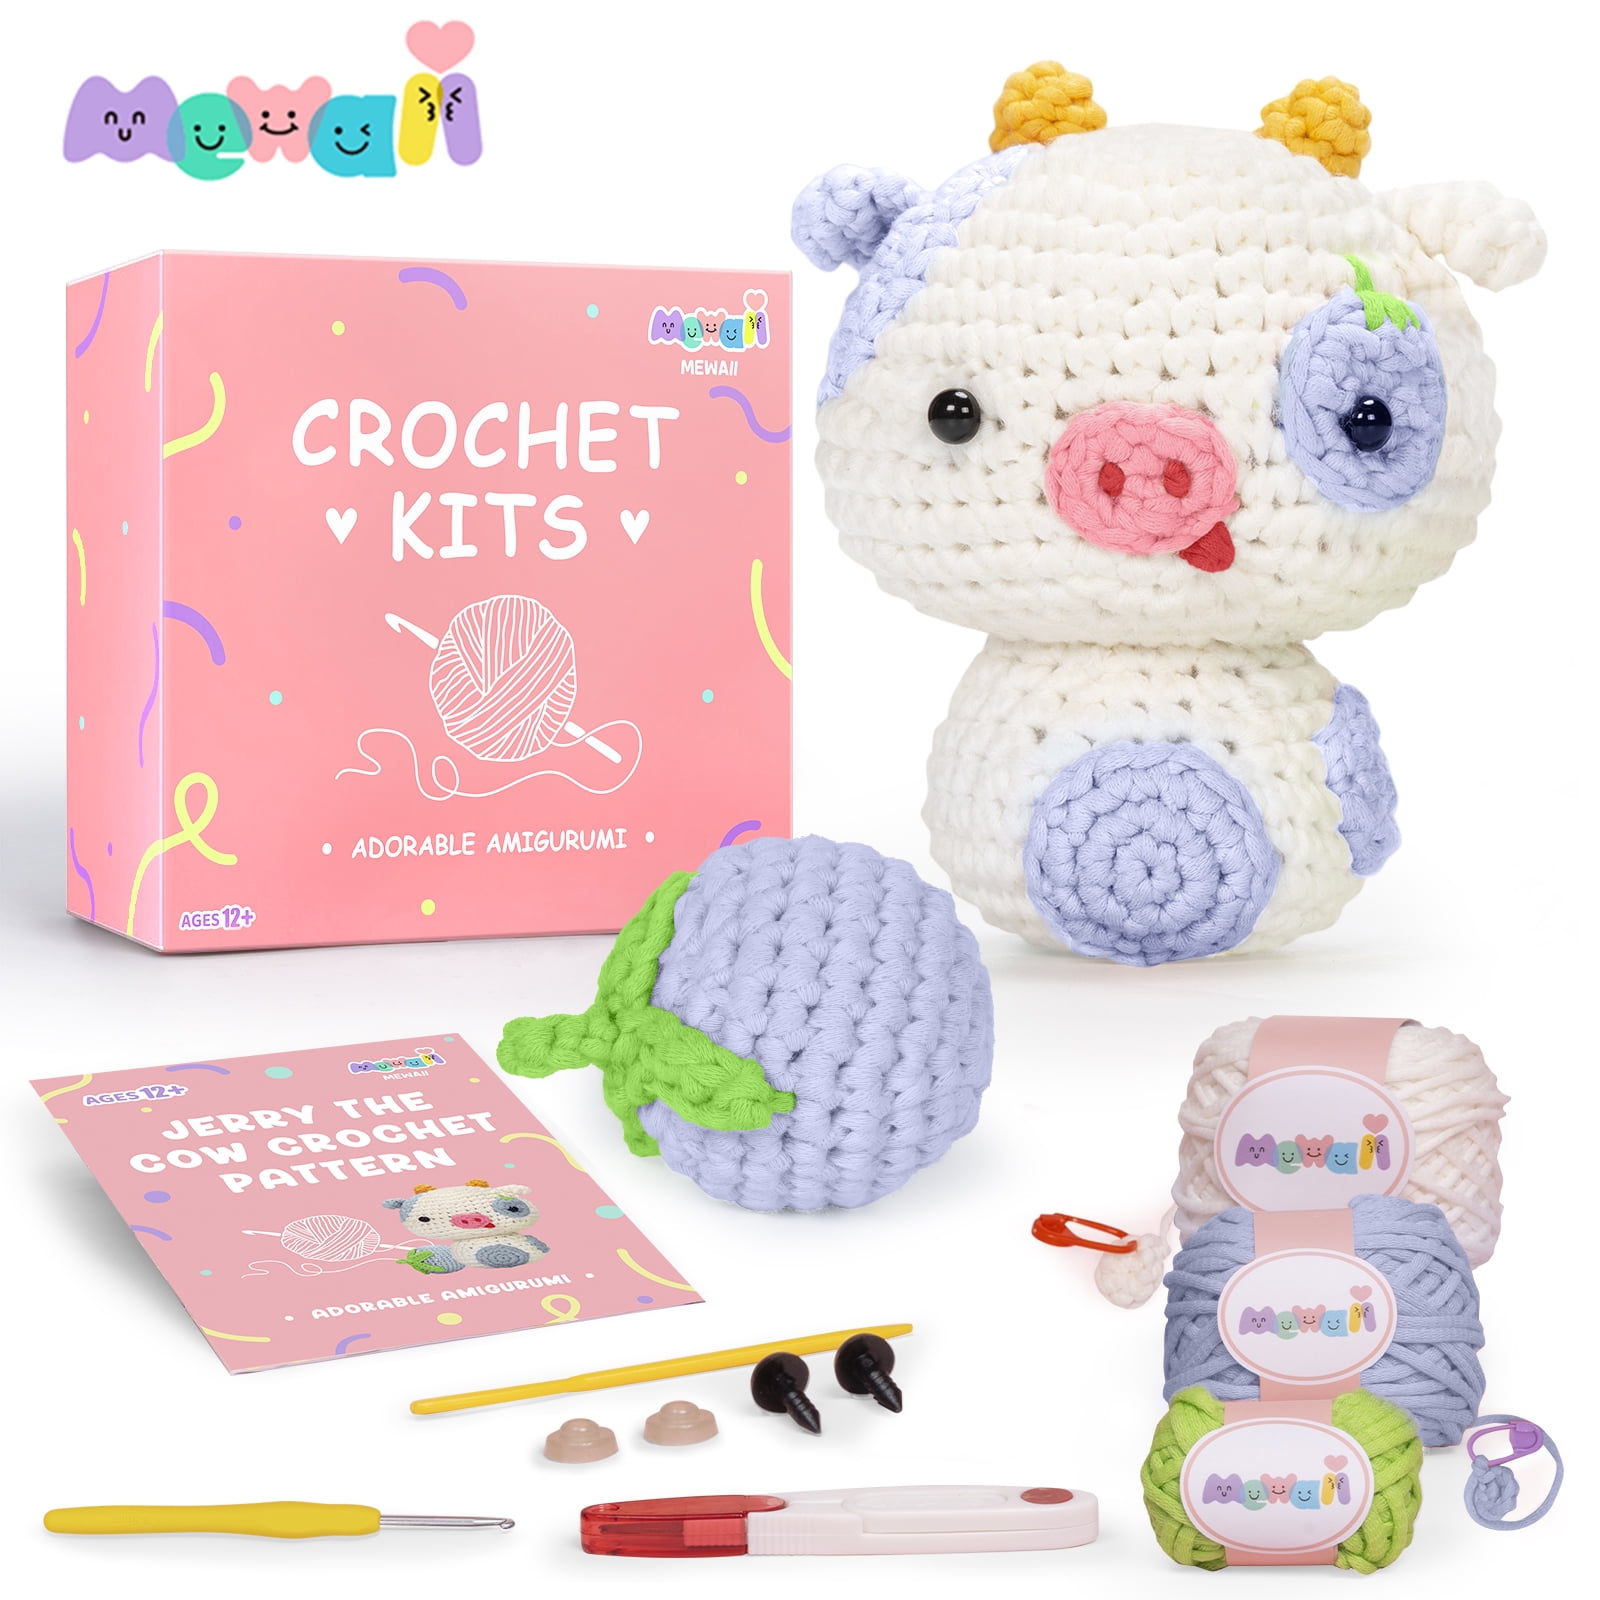 LAPOO lapoo crochet kit for beginners, strawberry beginner crochet starter  kit for complete beginners adults - step-by-step video t